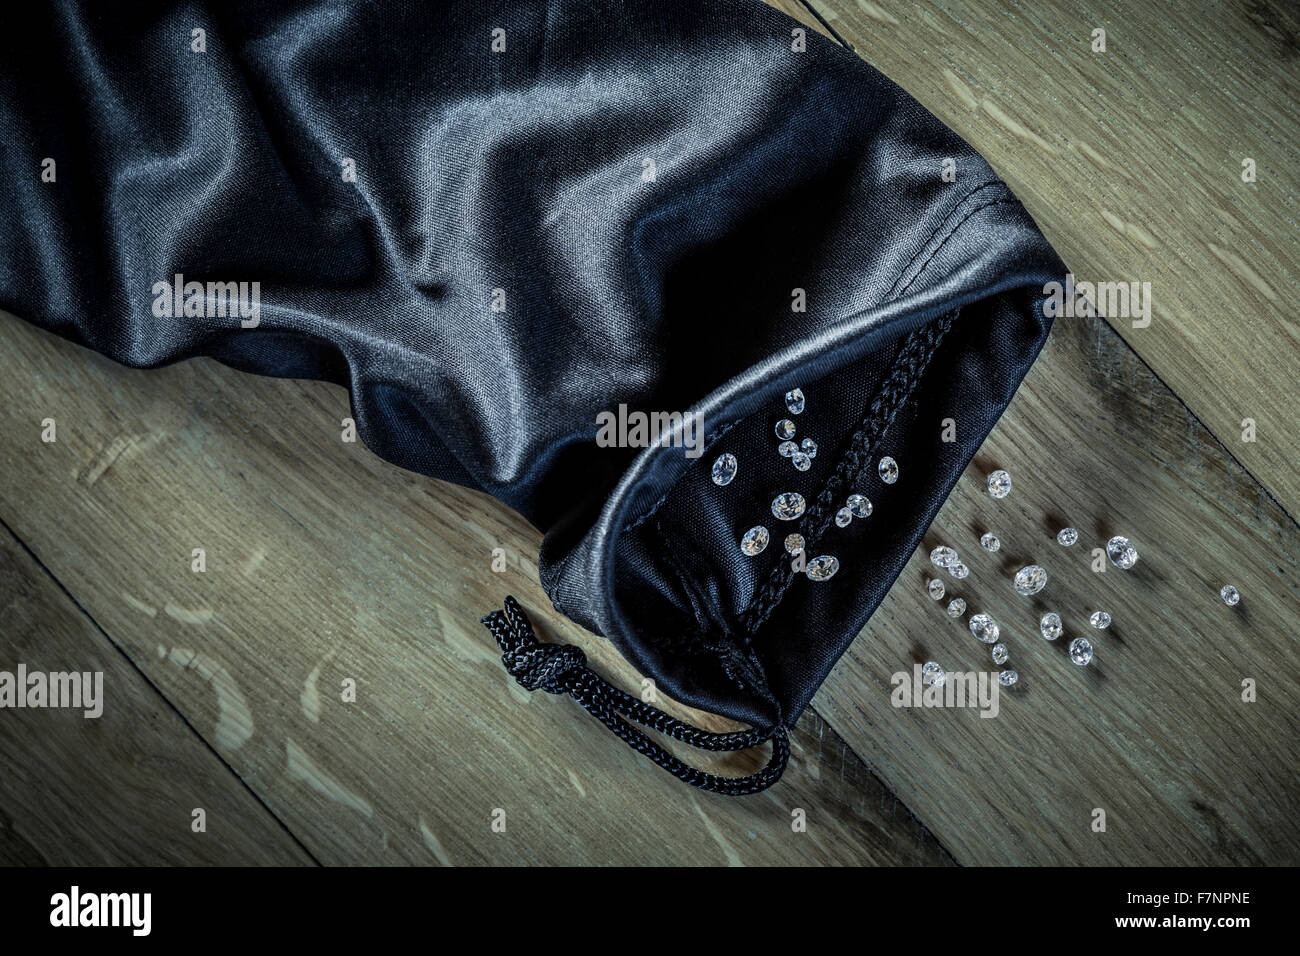 Diamonds spilling from a black cloth bag. Stock Photo